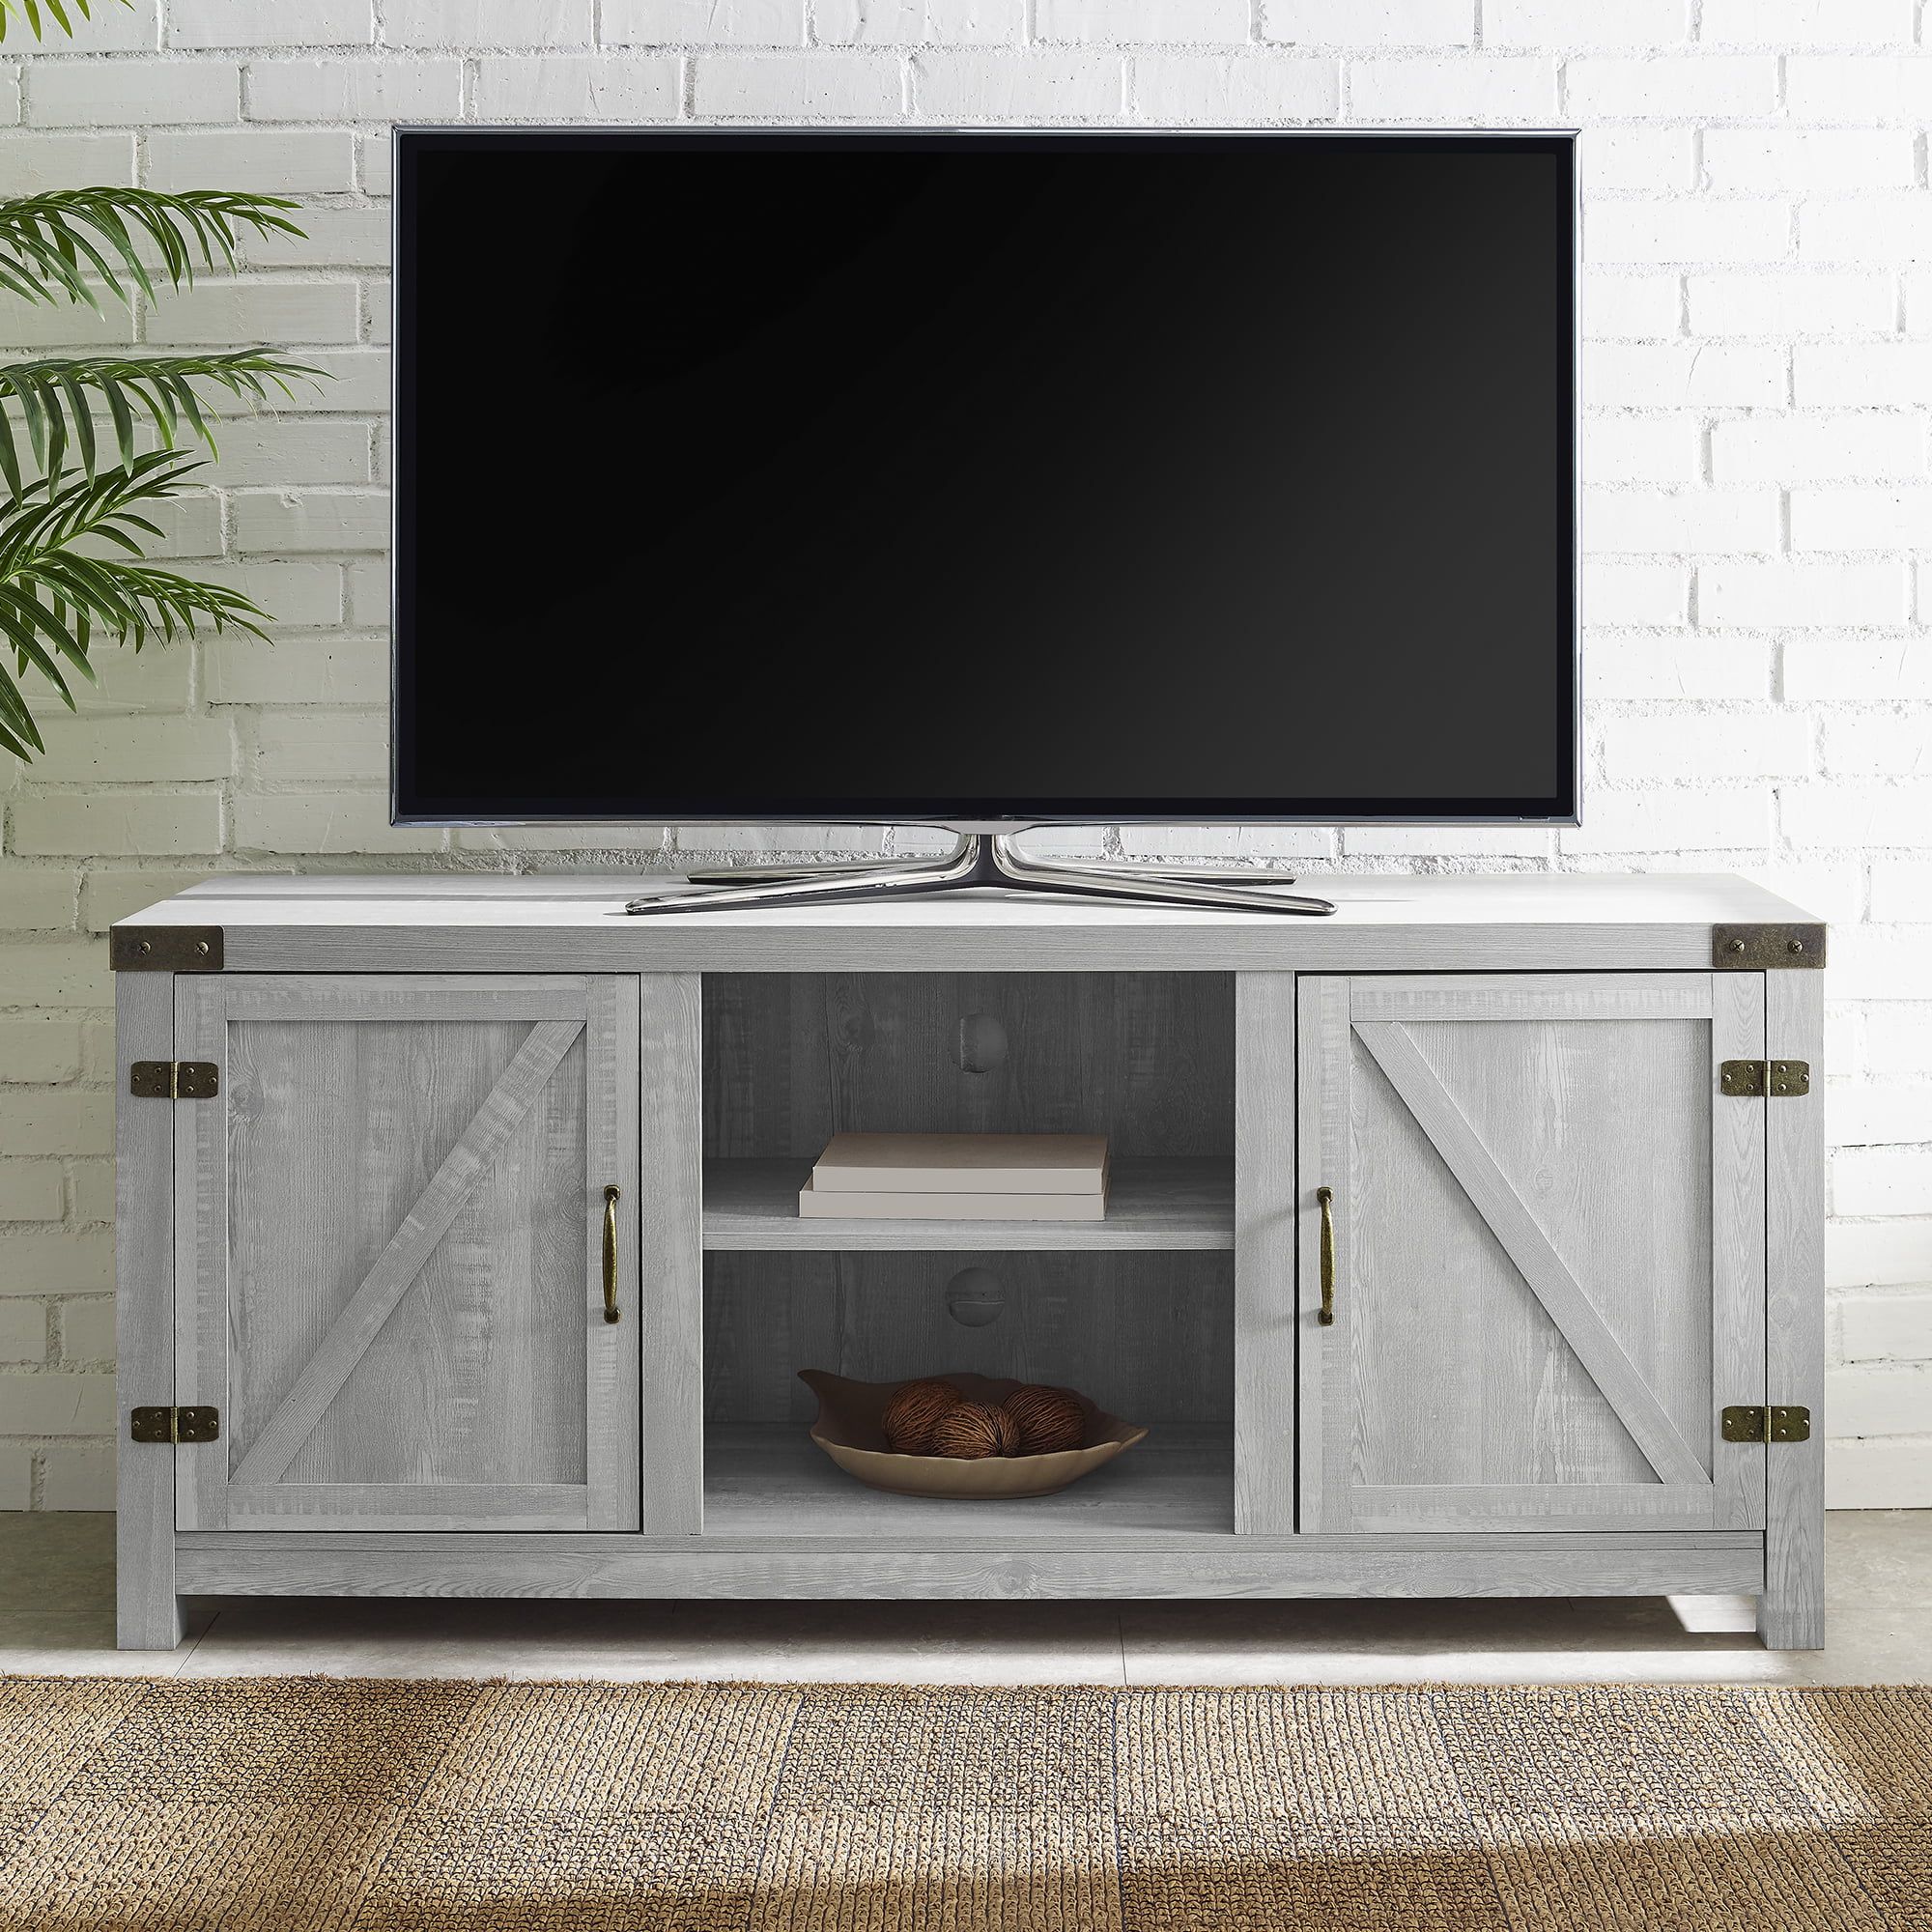 Woven Paths Modern Farmhouse Barn Door Tv Stand For Tvs Up To 65 With Regard To Farmhouse Stands For Tvs (Gallery 14 of 20)